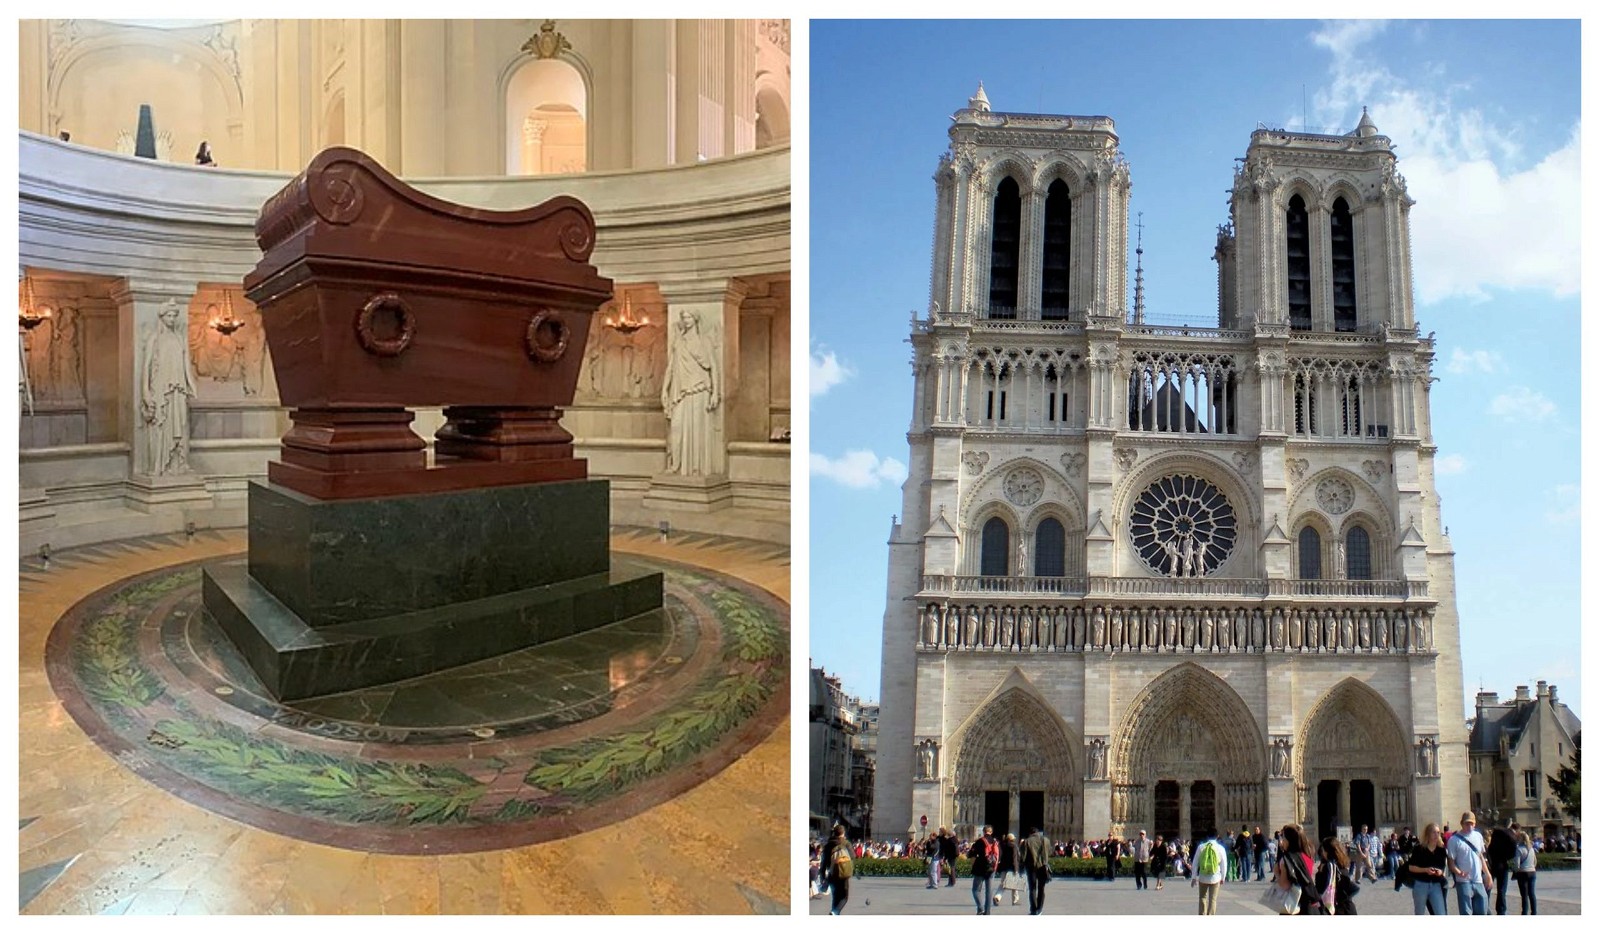 Napoleon's Tomb and Notre-Dame